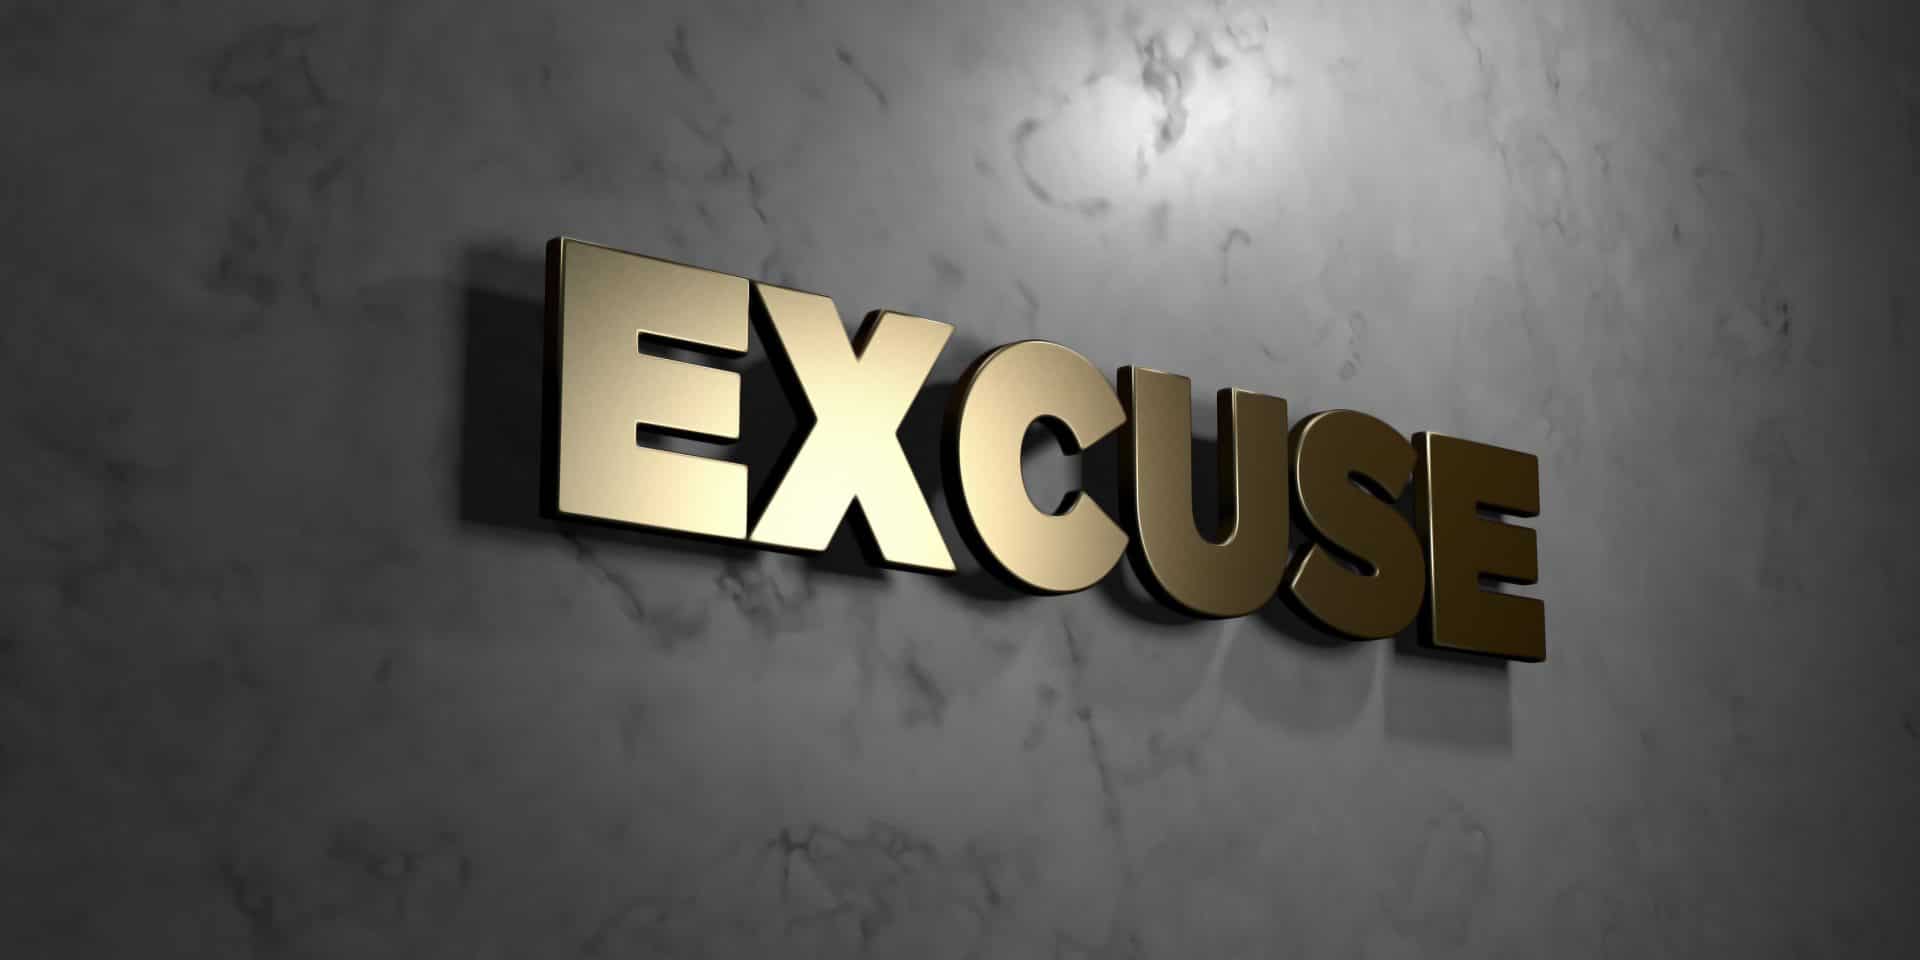 Strategies to Deal With Employee Excuses